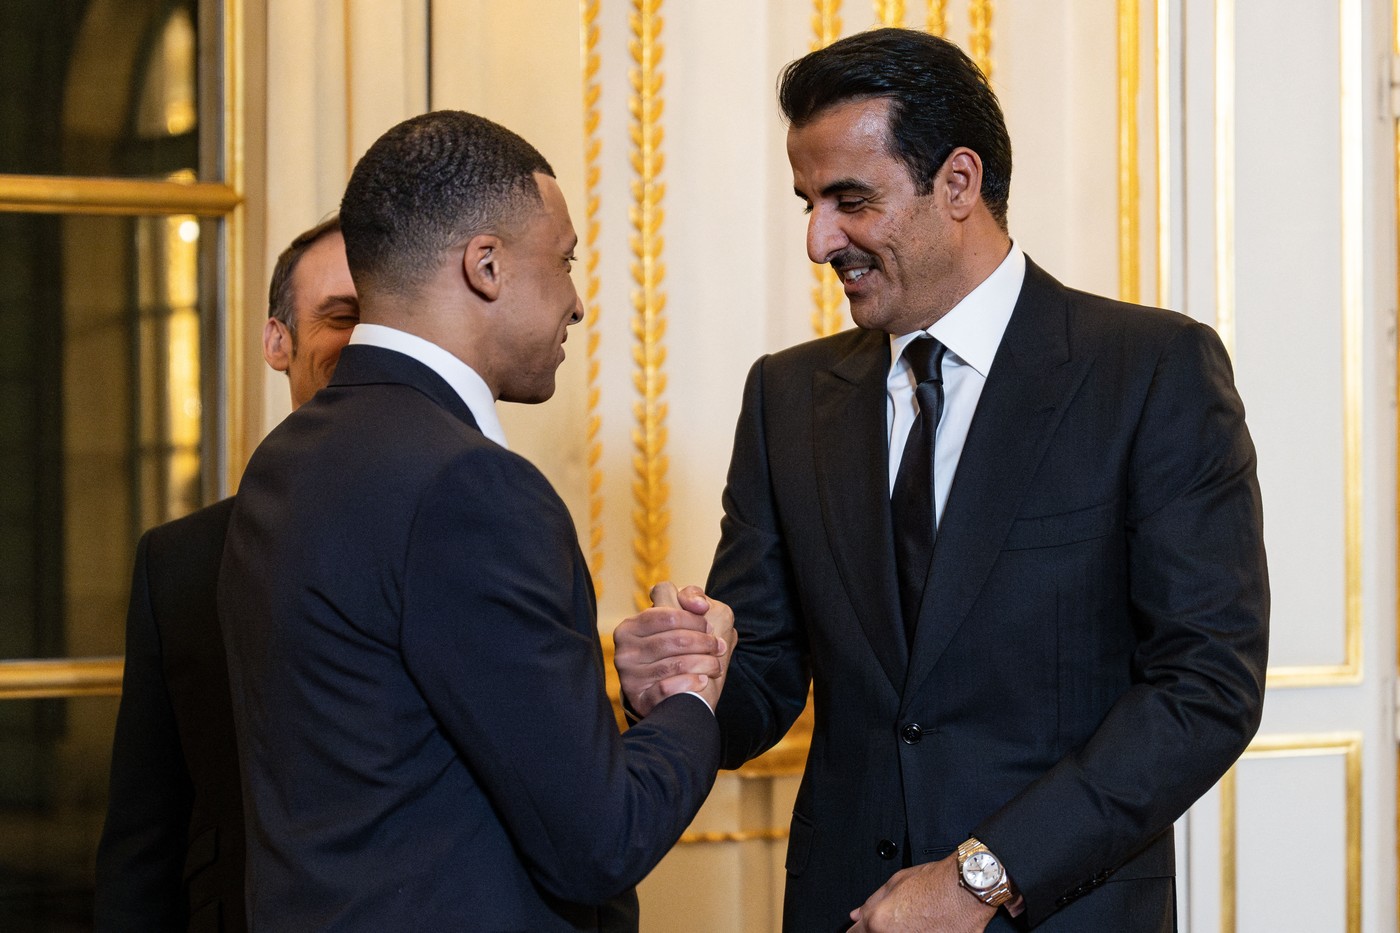 Kylian Mbappe and Qatar s Emir Sheikh Tamim bin Hamad al-Thani at an official dinner on the sidelines of the state visit of Emir of Qatar Sheikh Tamim bin Hamad Al Thani at the Elysee Palace in Paris, France on February 27, 2024.,Image: 851708624, License: Rights-managed, Restrictions: , Model Release: no